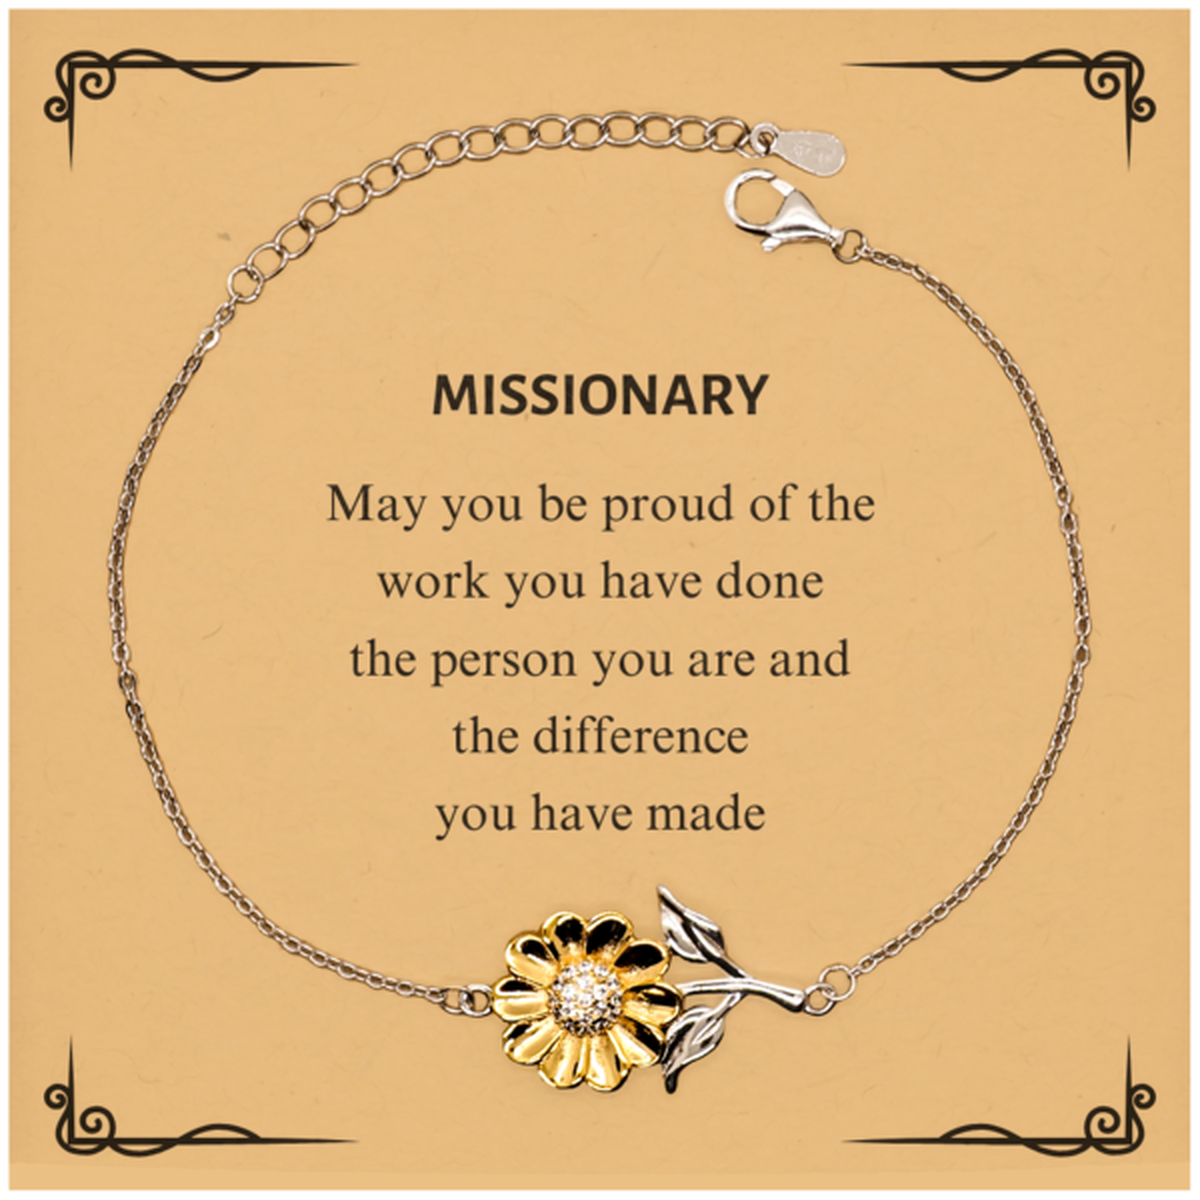 Missionary May you be proud of the work you have done, Retirement Missionary Sunflower Bracelet for Colleague Appreciation Gifts Amazing for Missionary